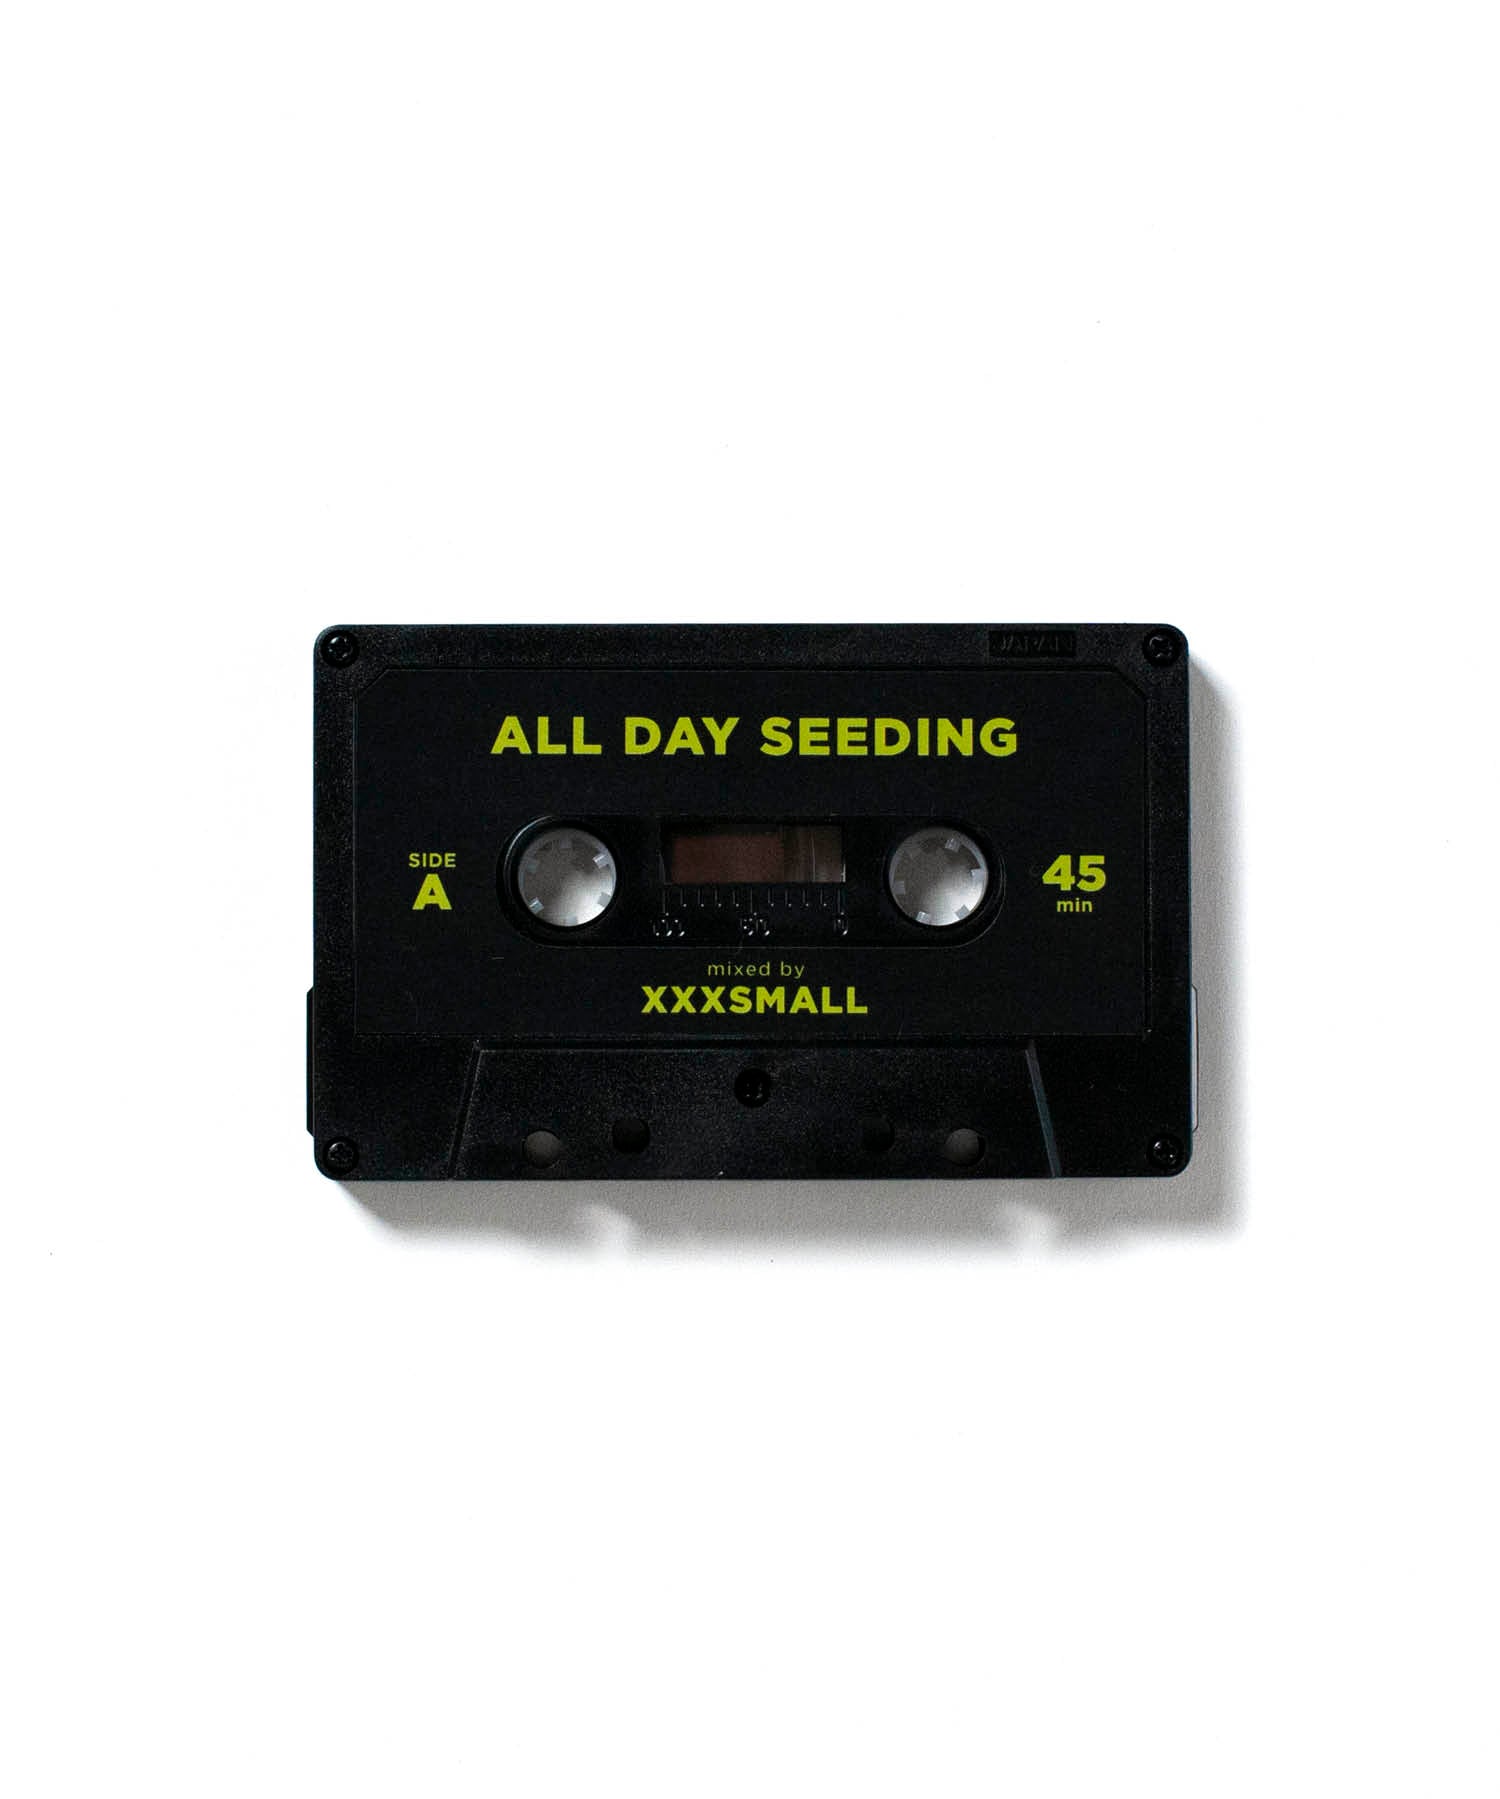 A.D.M. #18 (ALL DAY SEEDING) - Mixed by XXXSMALL | LIKE THIS SHOP